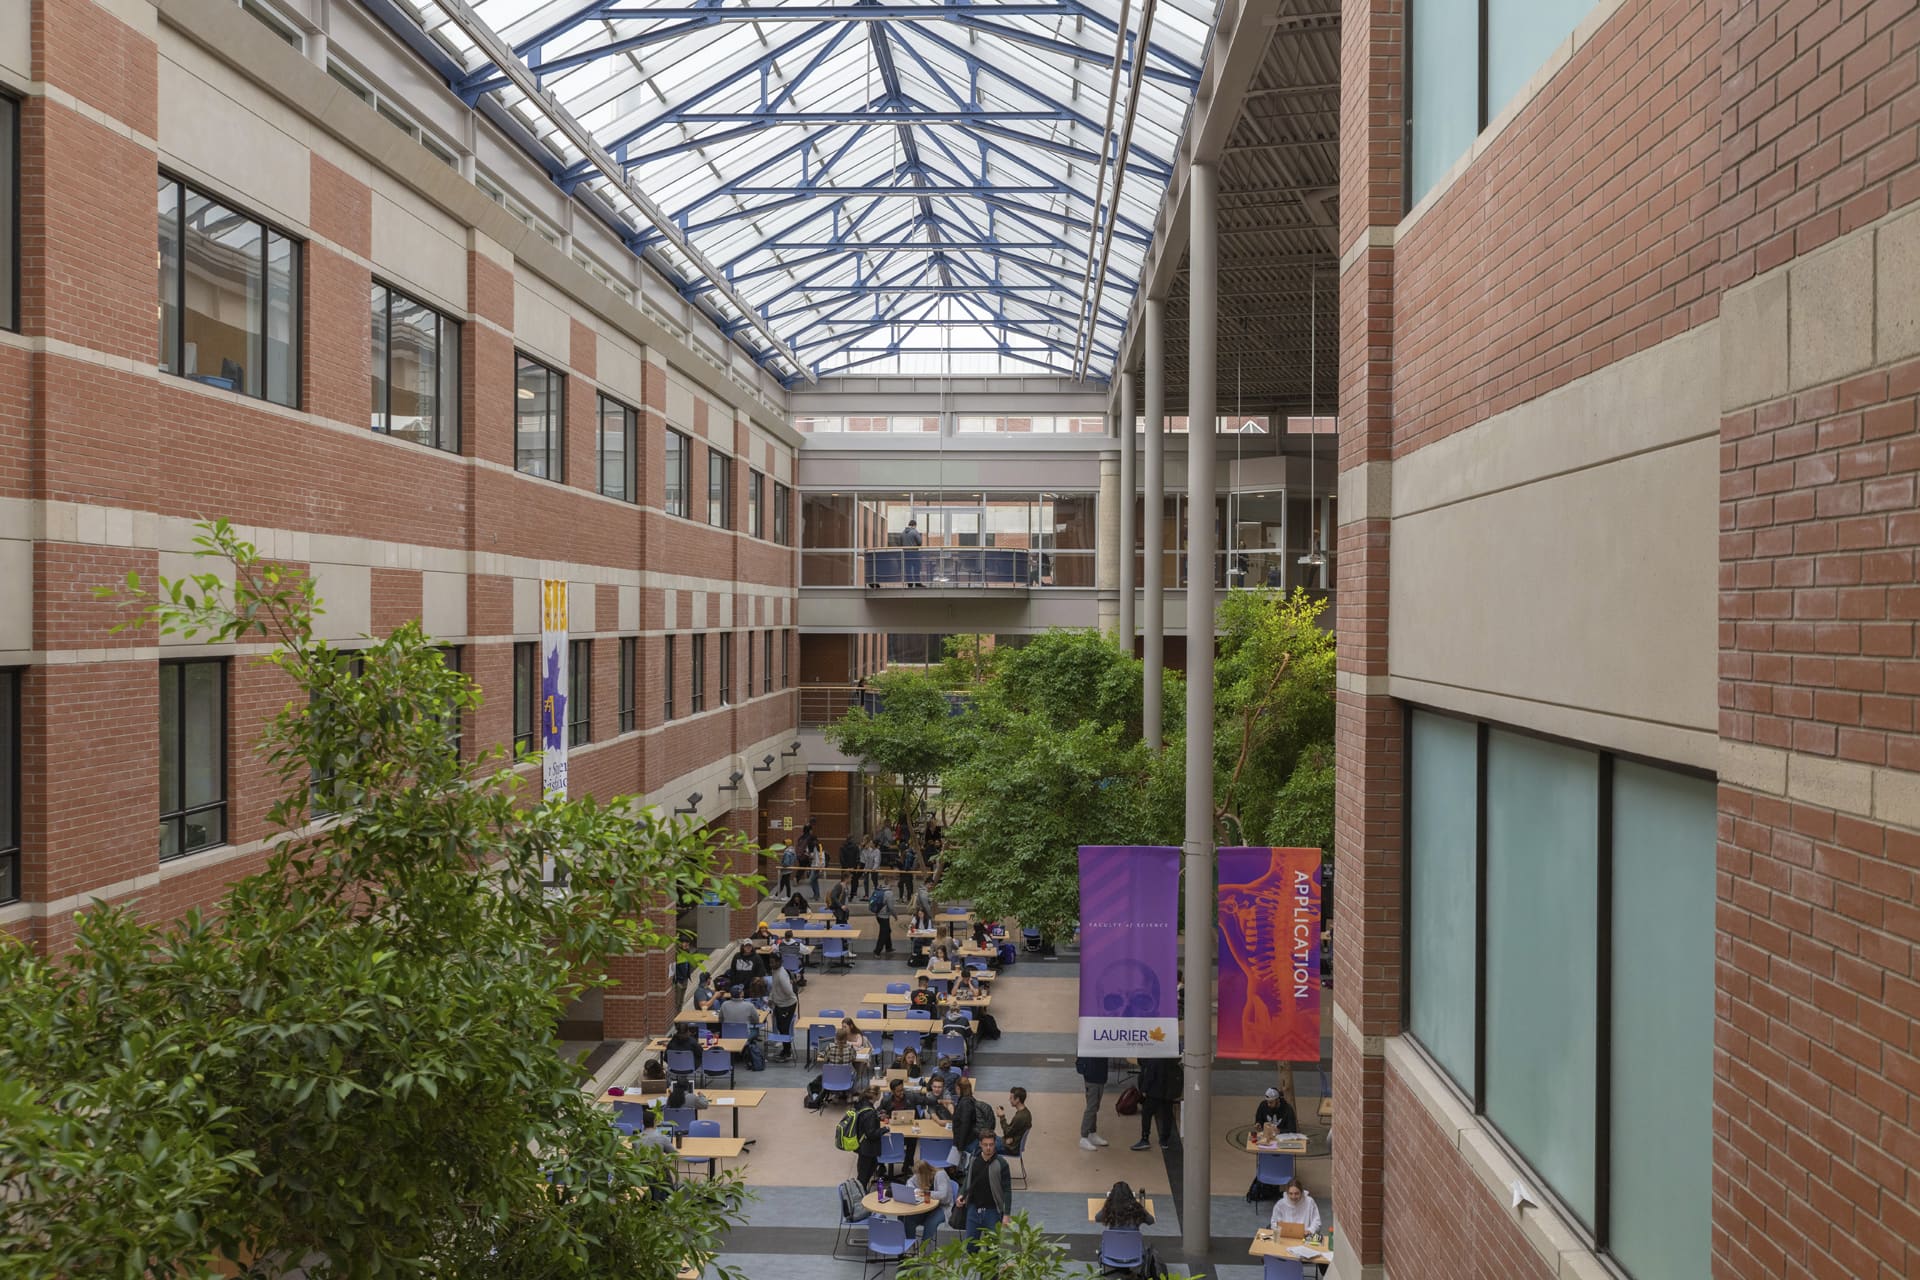 The Science Atrium on the Waterloo campus